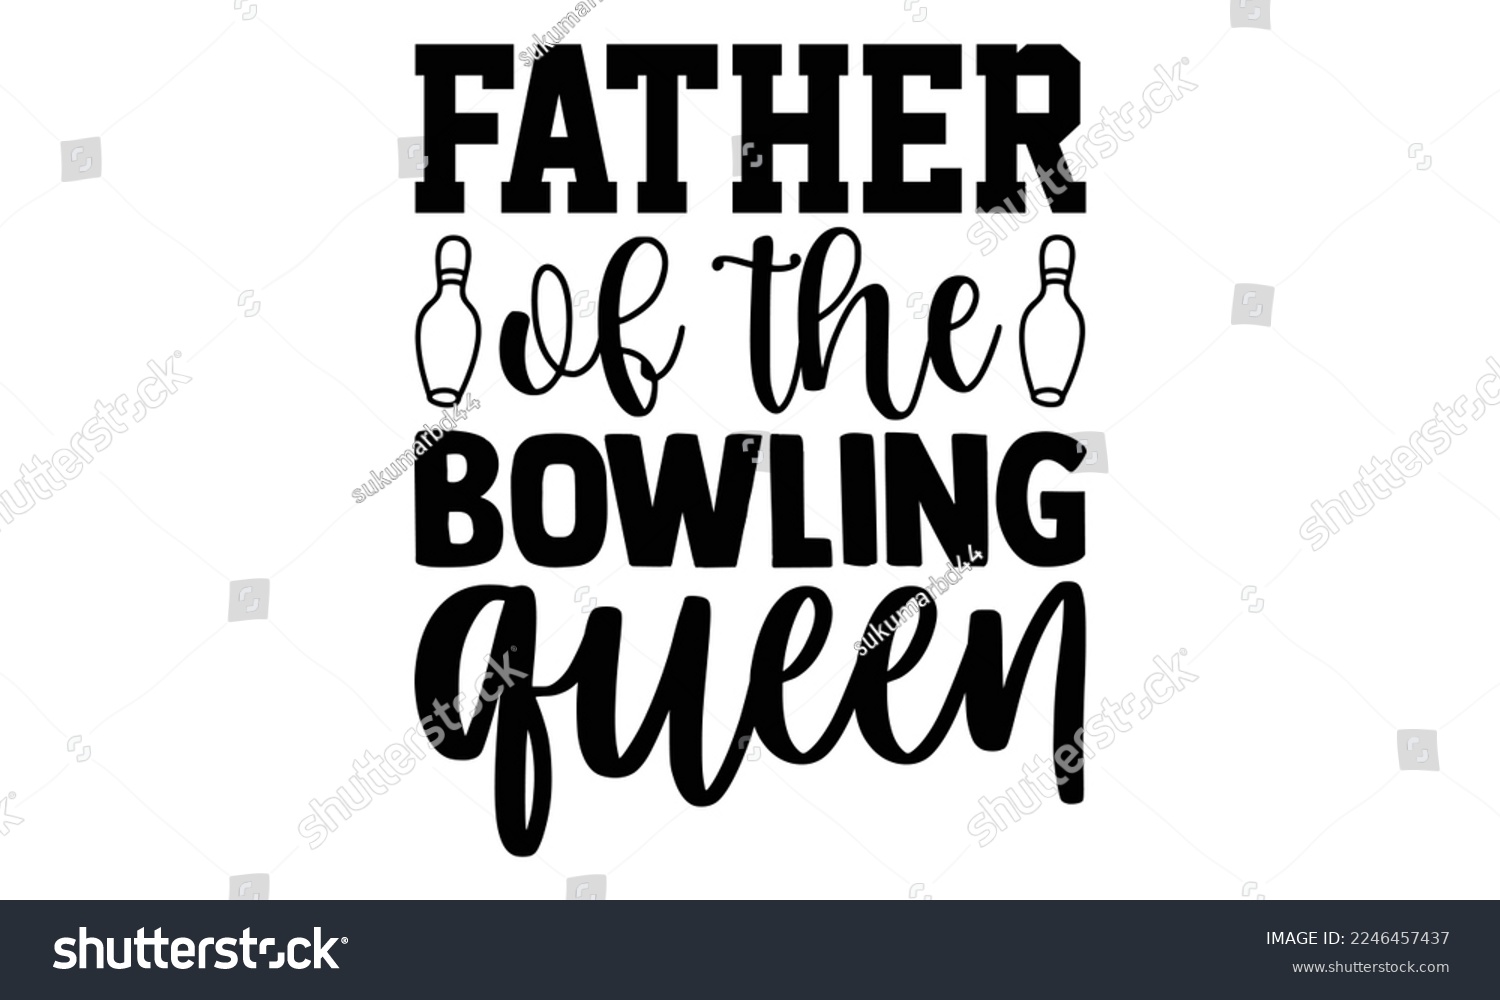 SVG of Father Of The Bowling Queen - Bowling T-shirt Design, Illustration for prints on bags, posters, cards, mugs, svg for Cutting Machine, Silhouette Cameo, Hand drawn lettering phrase. svg